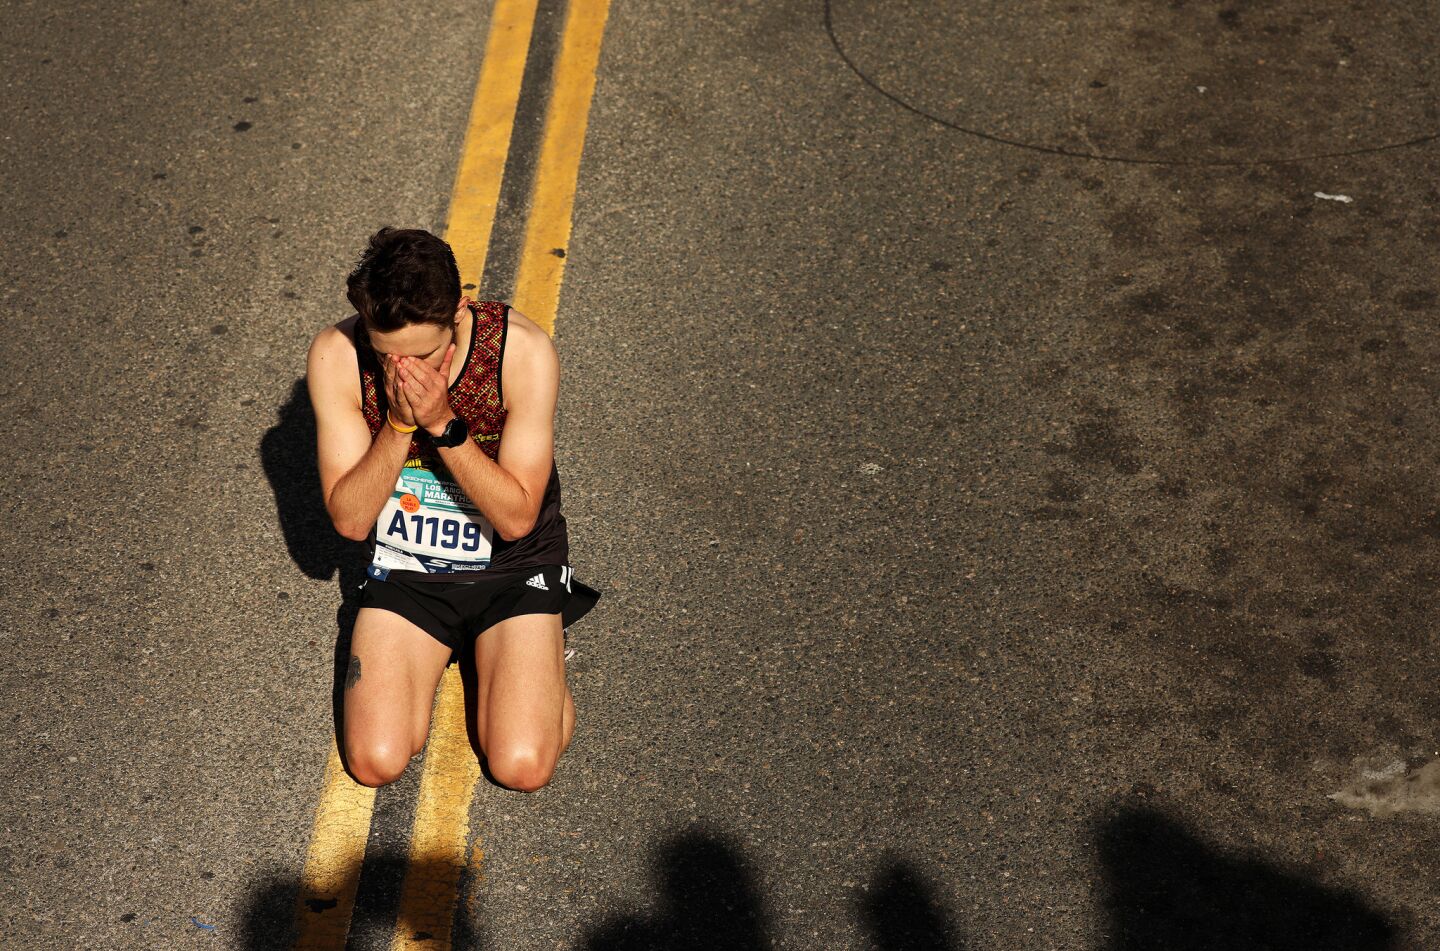 Race participant Armando Osorio drops to his knees after crossing the finish line in Santa Monica during the L.A. Marathon on Sunday.